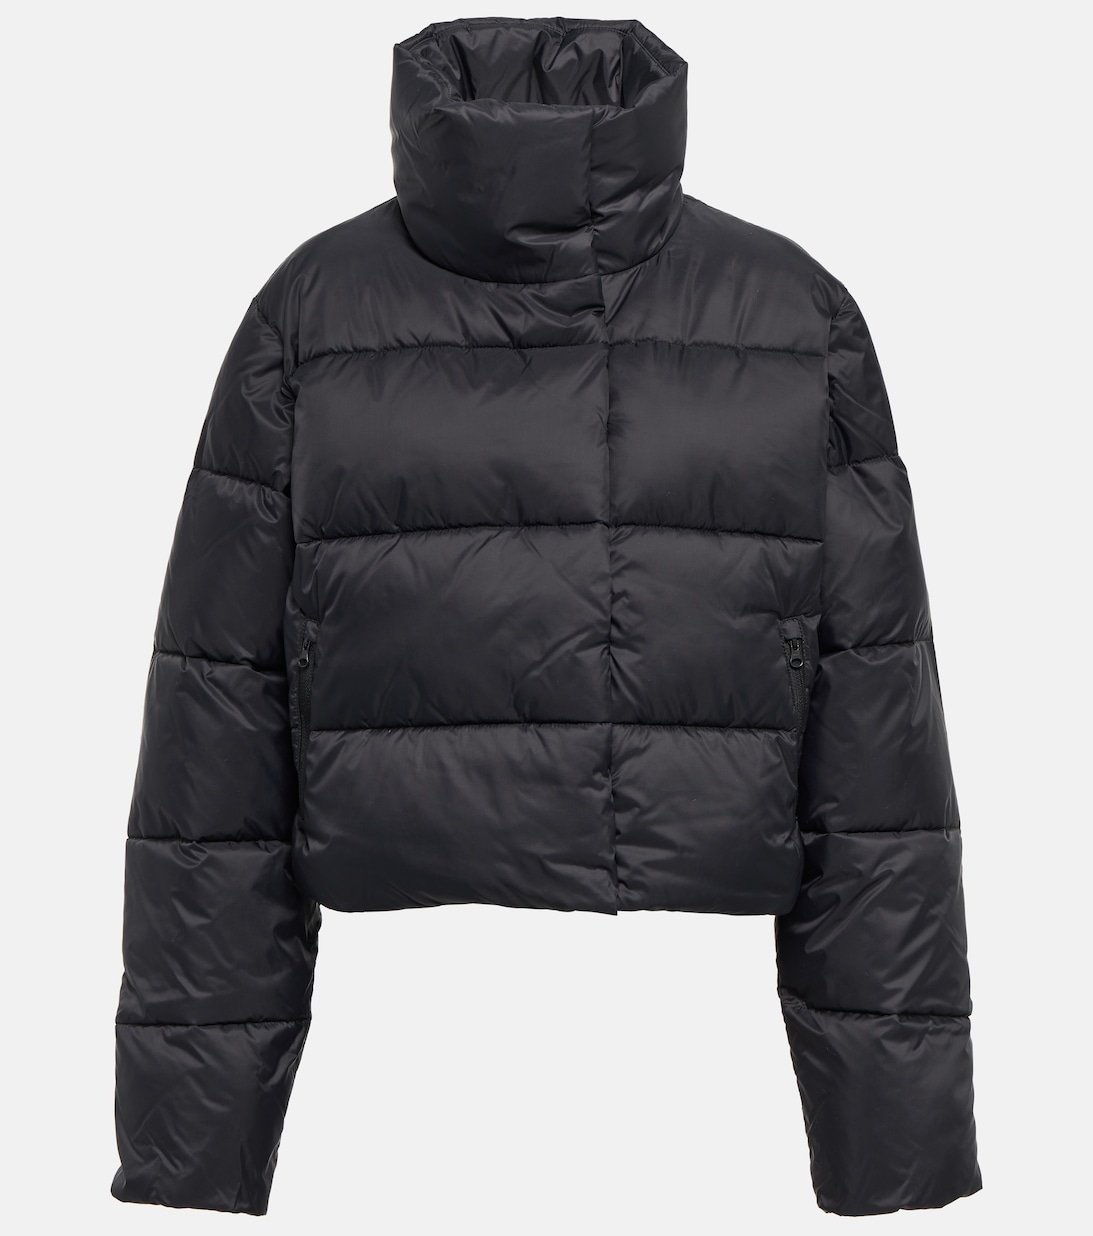 ALO YOGA Cropped Puffer Jacket in Black